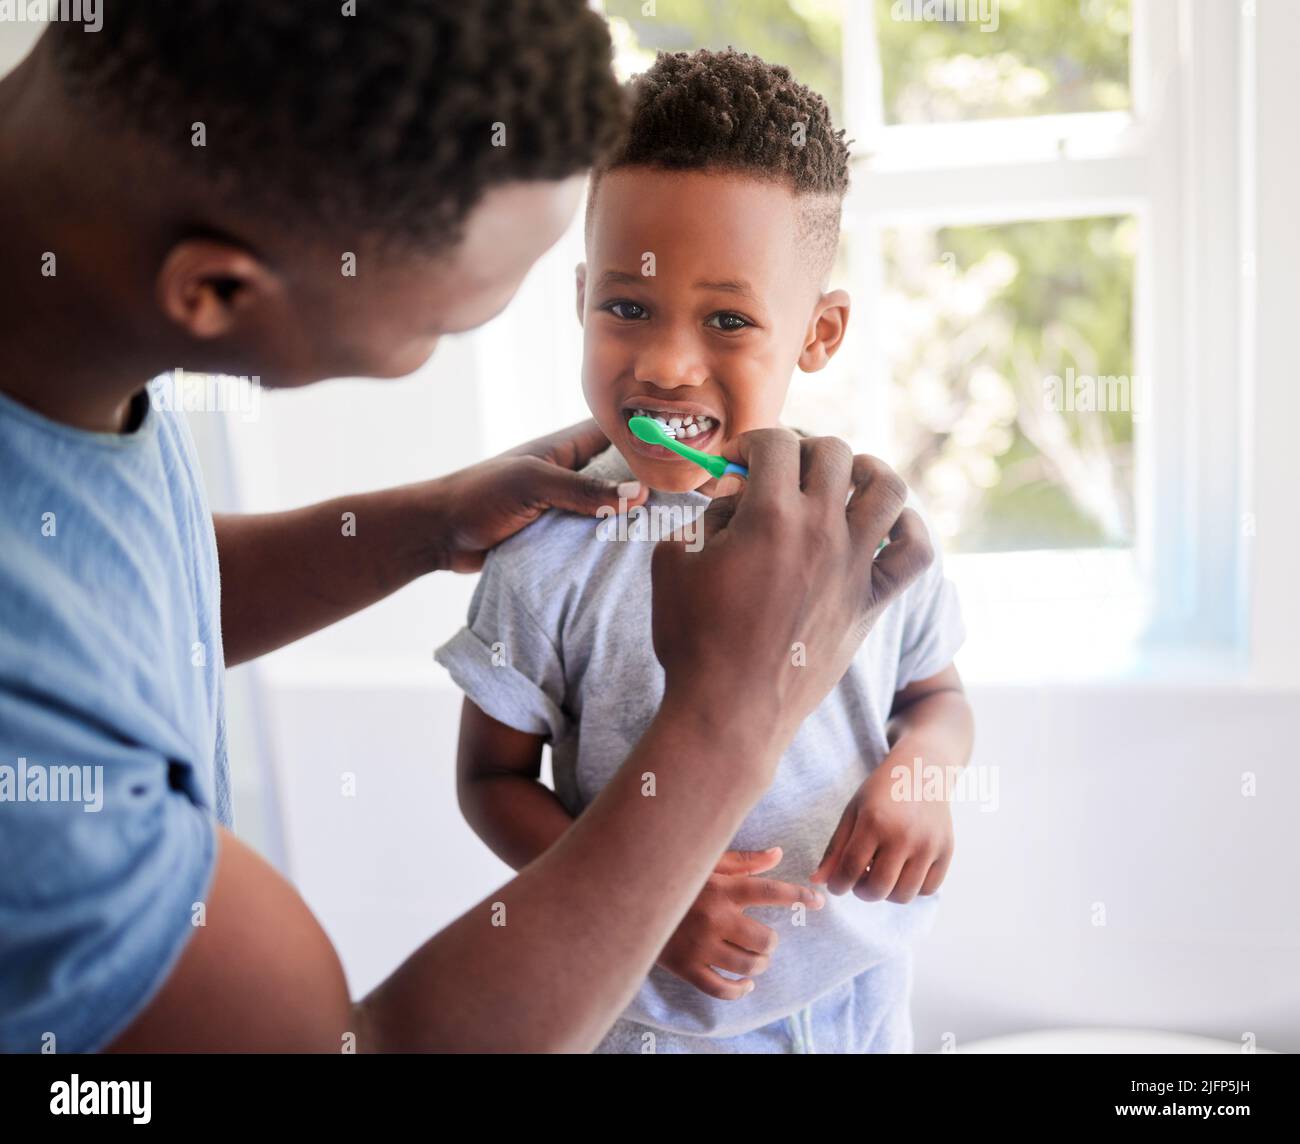 Dads showing me how to brush properly. Shot of a father brushing his sons teeth in the bathroom at home. Stock Photo